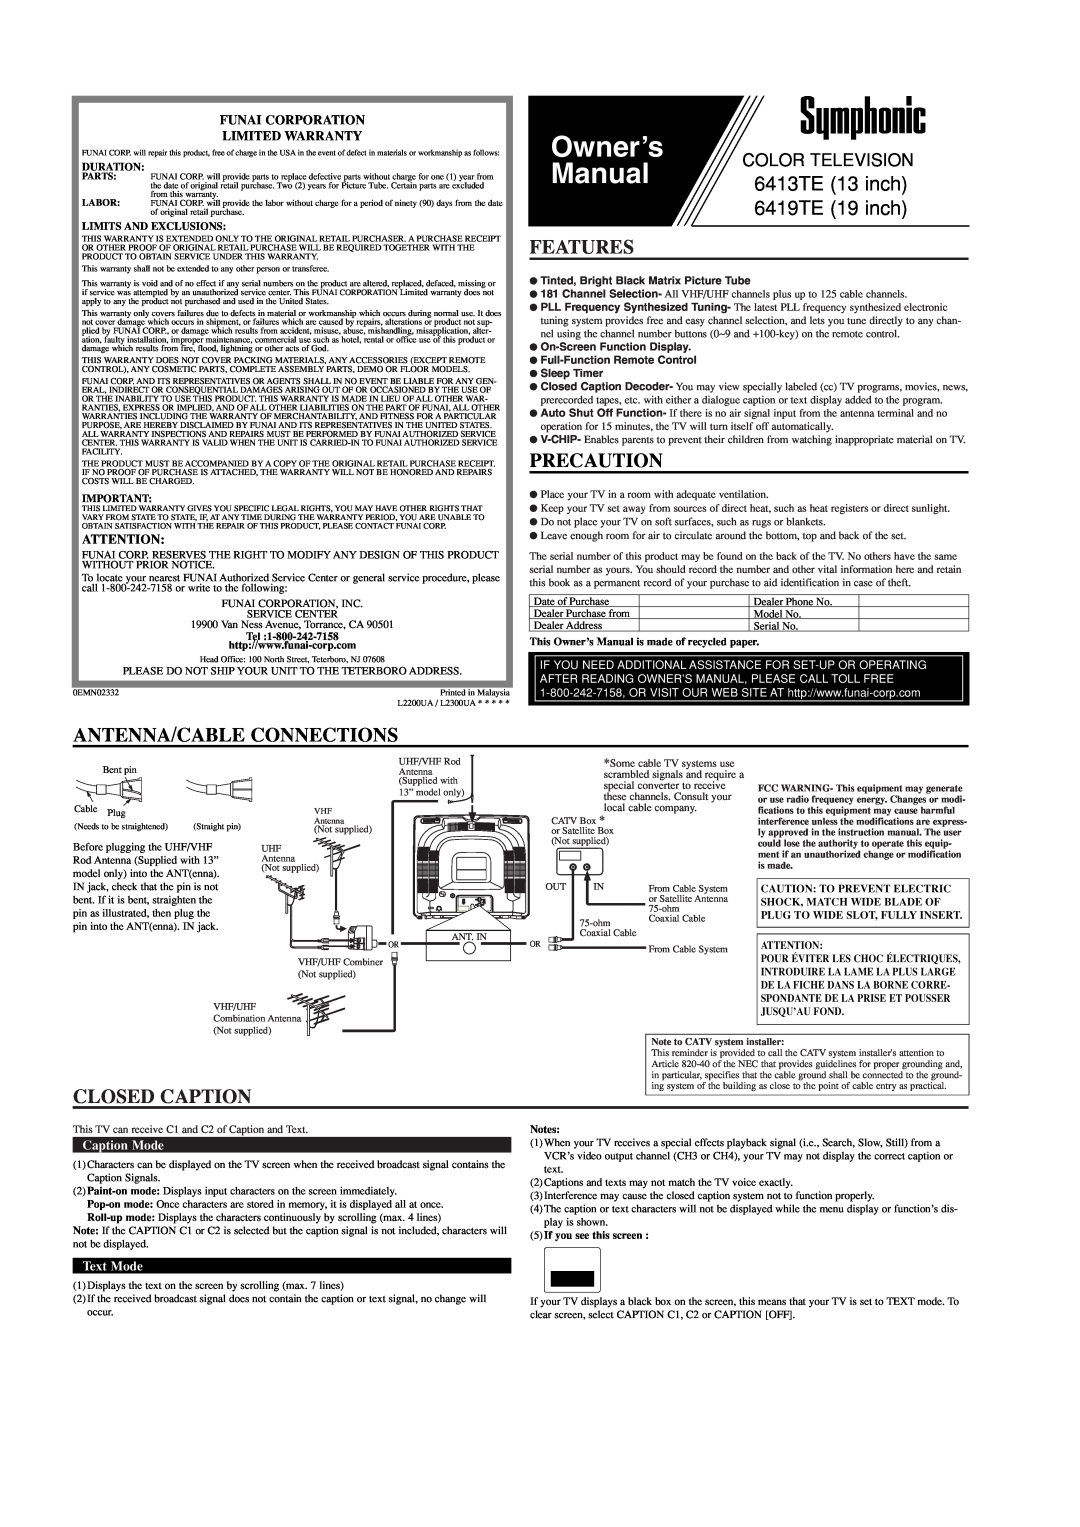 Symphonic 6413TE, 6419TE owner manual Features, Precaution, Antenna/Cable Connections, Closed Caption, Caption Mode 